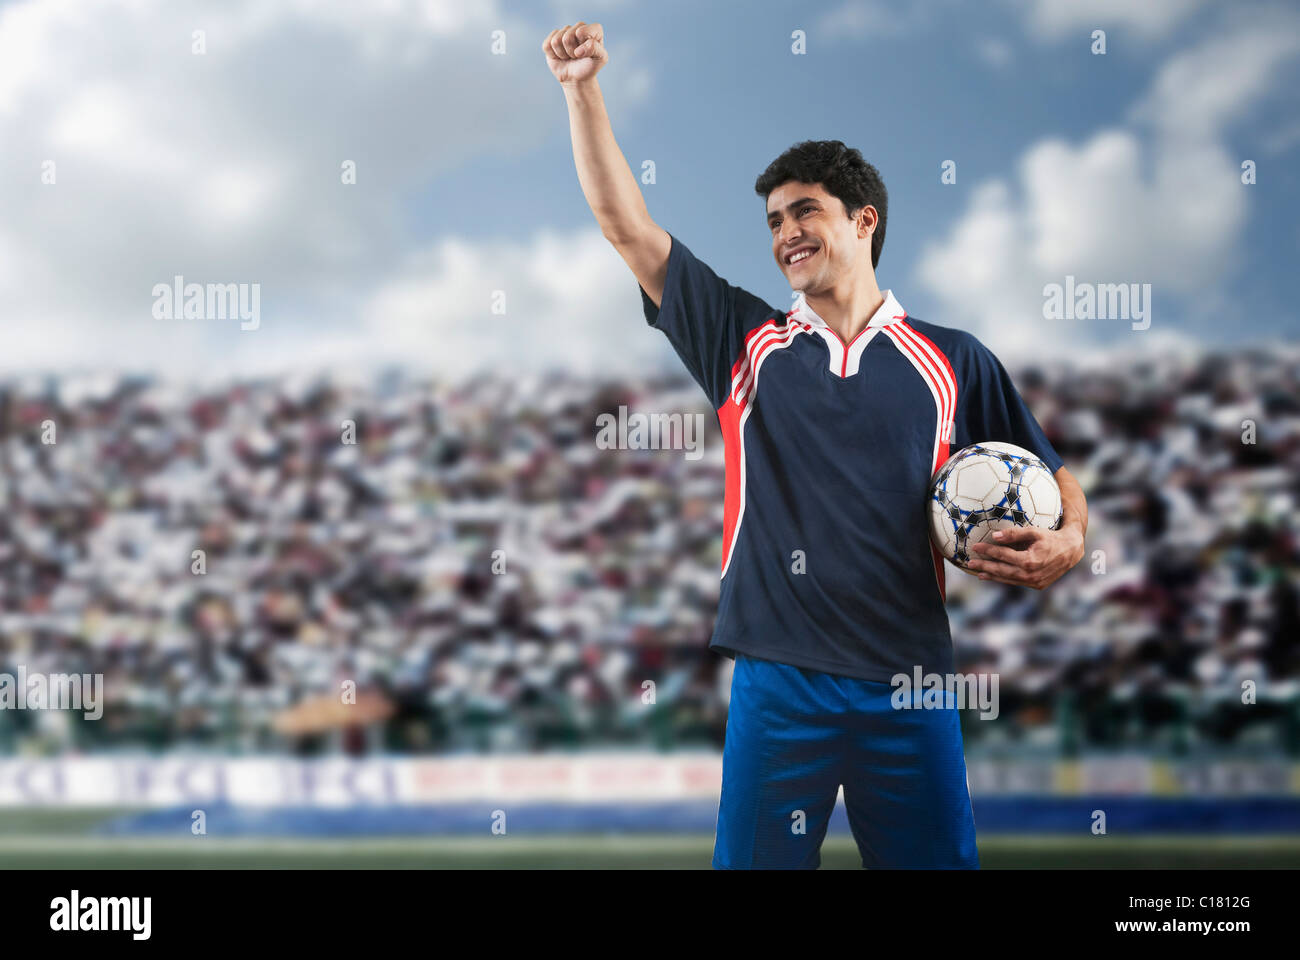 Soccer player holding a soccer ball and clenching fist Stock Photo